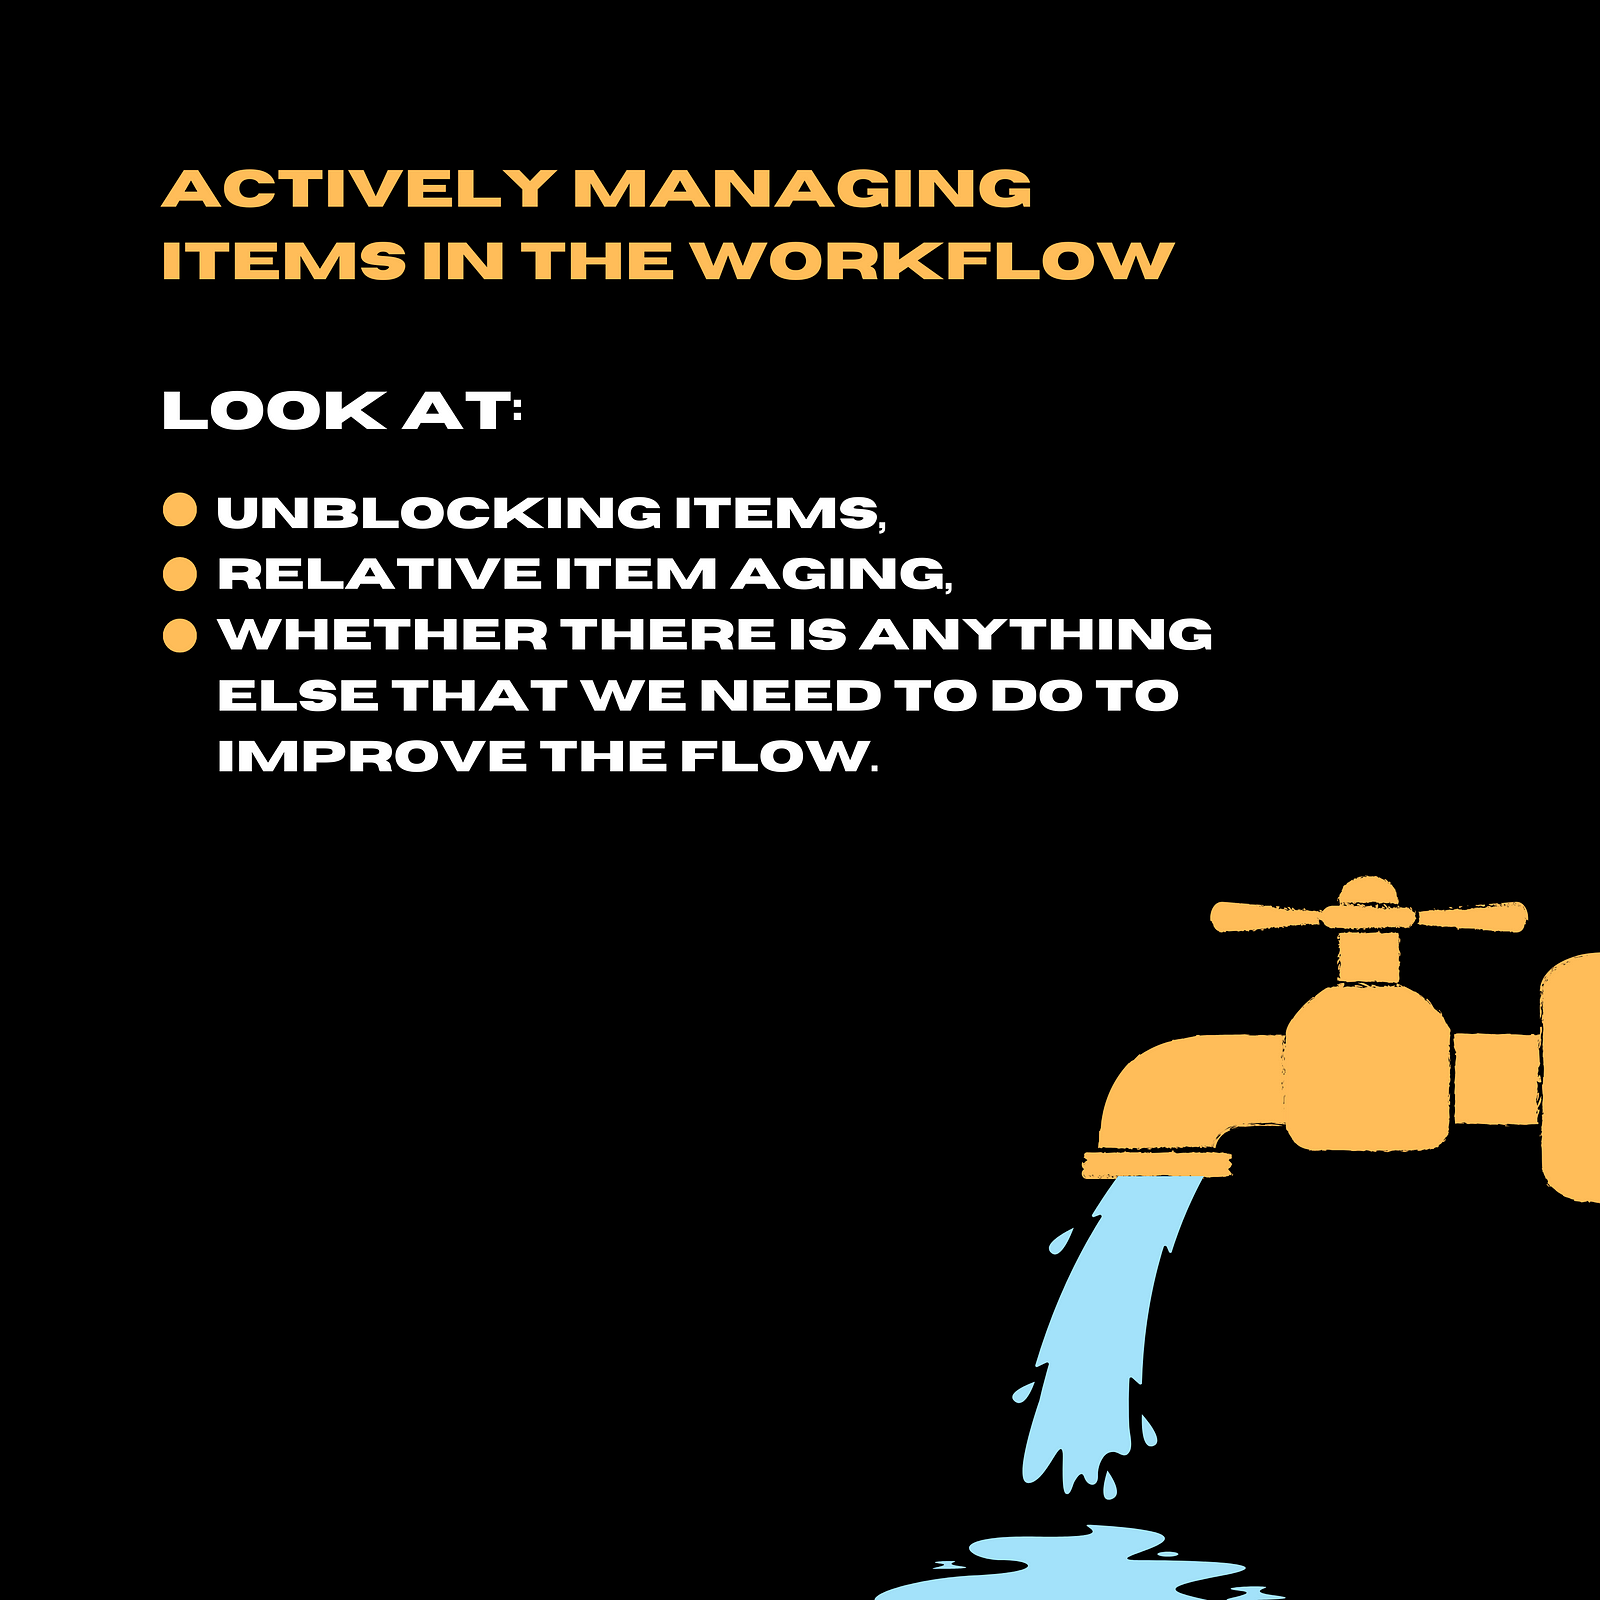 actively managing items in the workflow